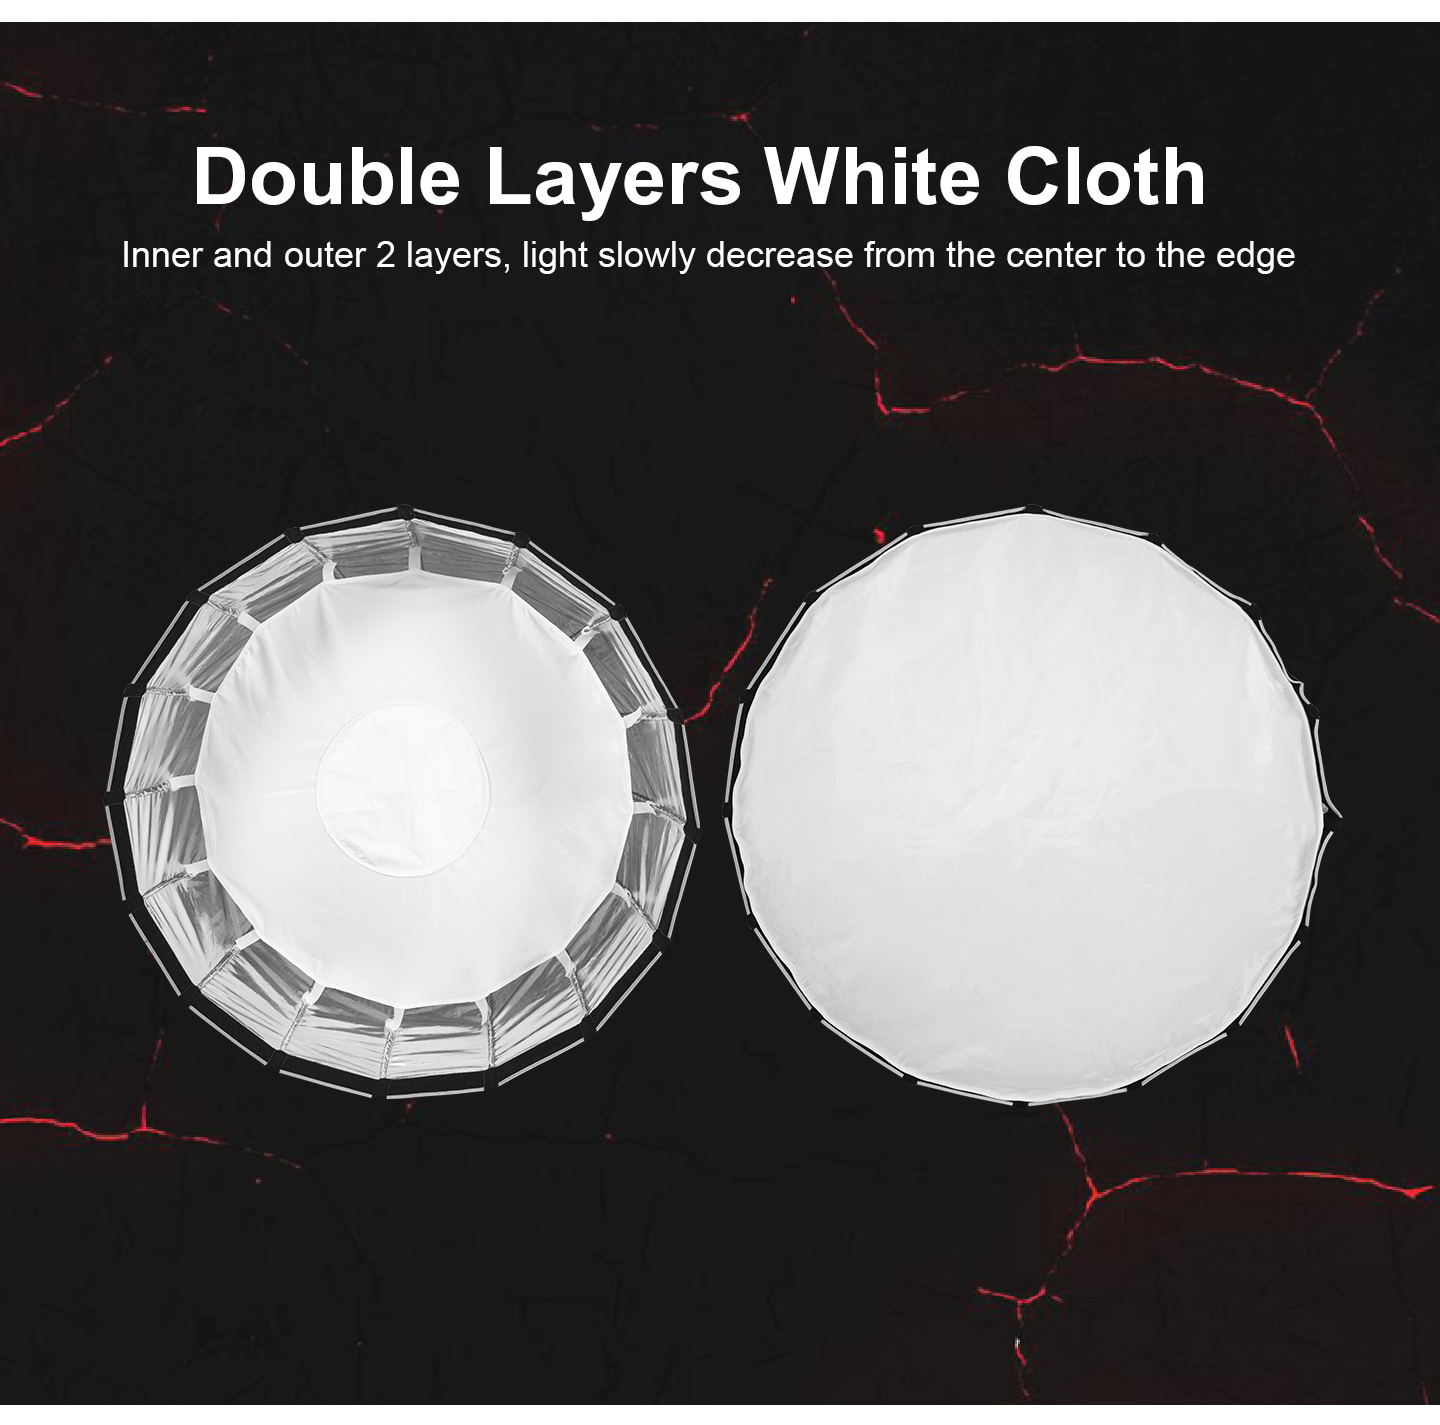 Double Layers White Cloth